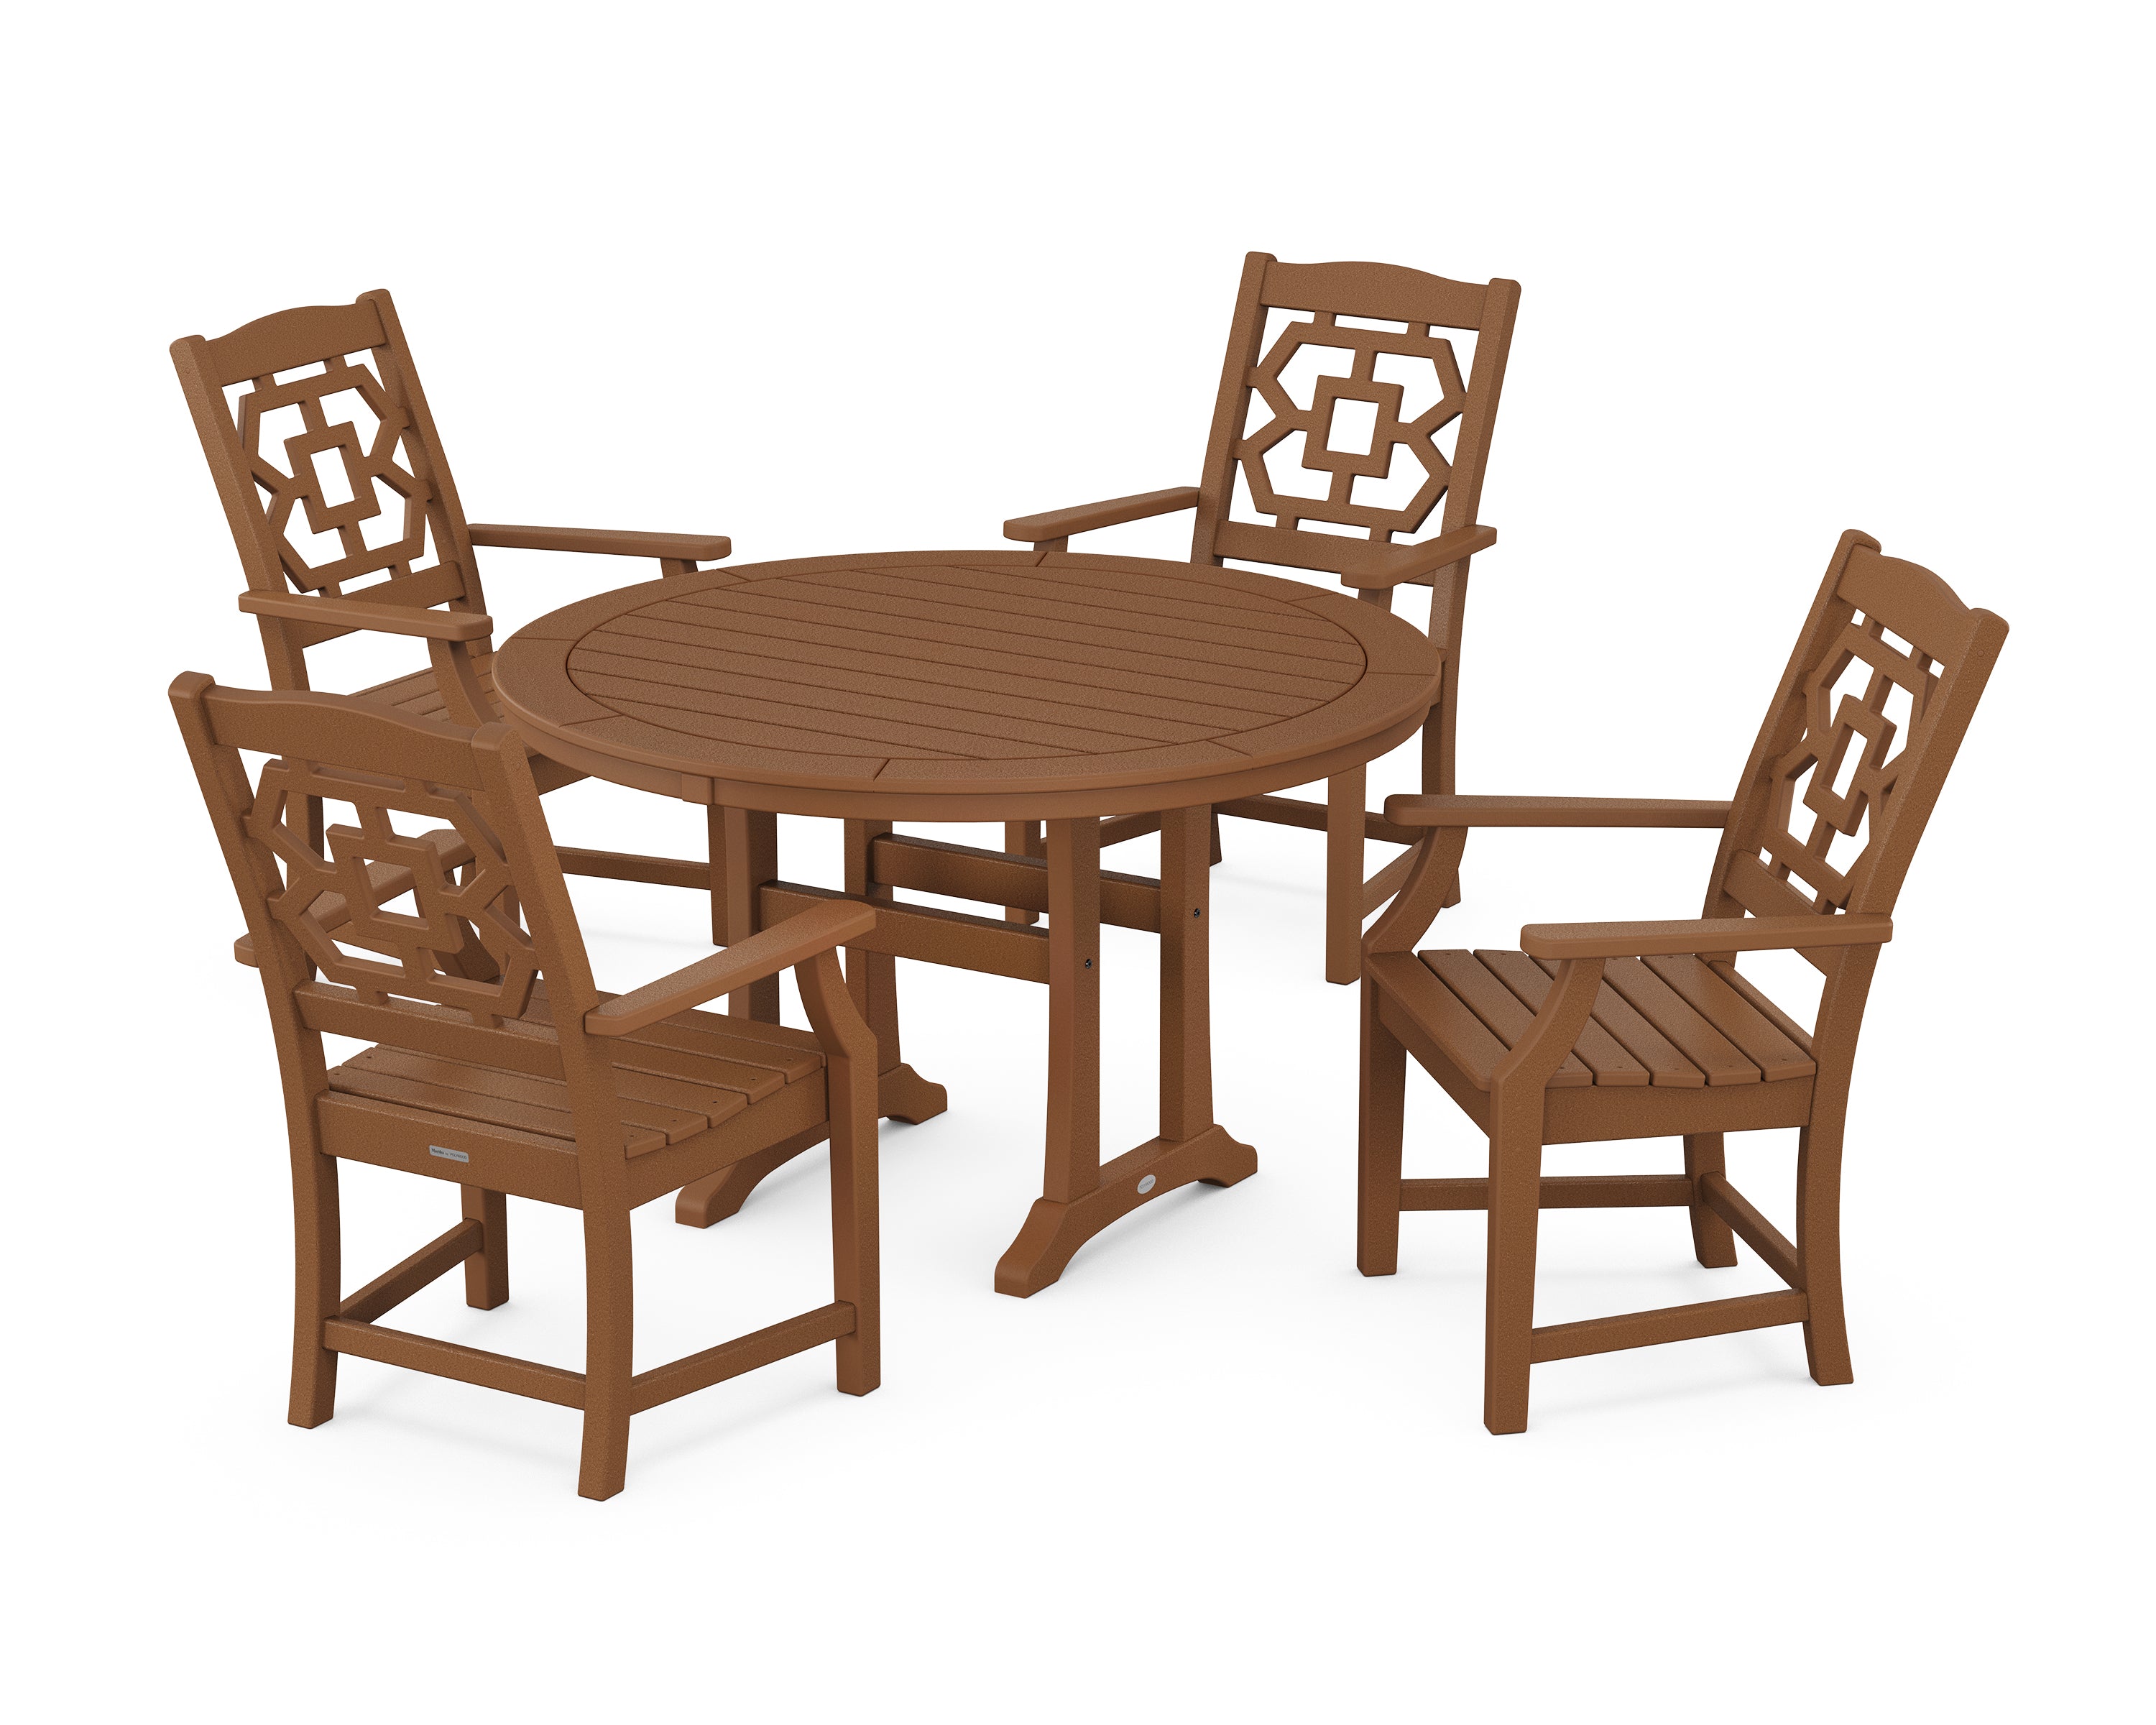 Martha Stewart by POLYWOOD® Chinoiserie 5-Piece Round Dining Set with Trestle Legs in Teak